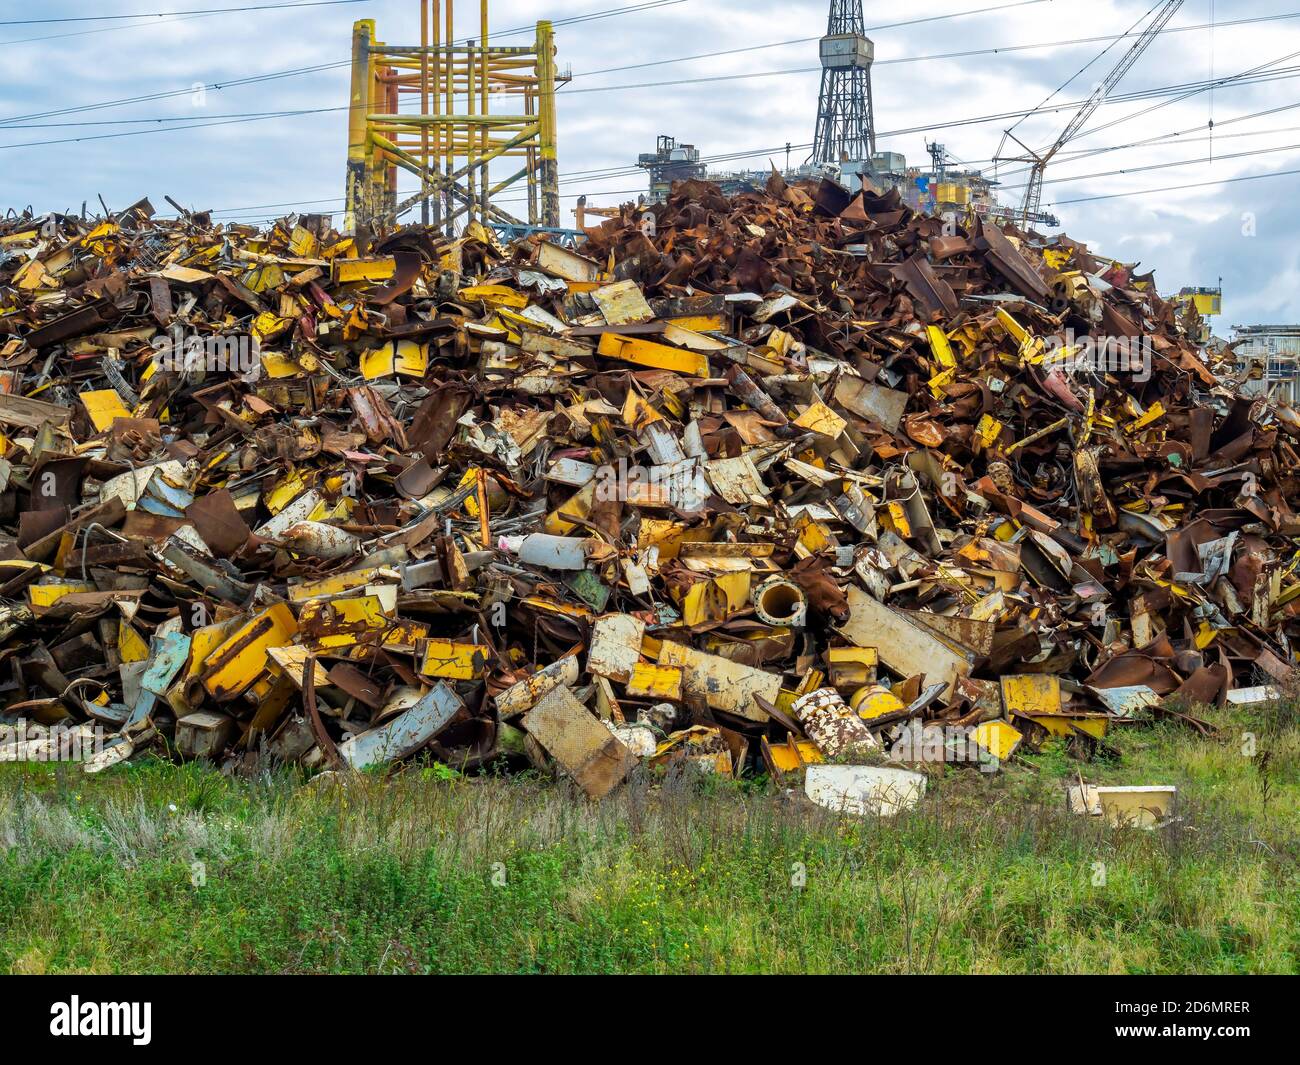 Scrap steel from offshore structures after recycling at Able UK facility at Greatham awaiting sale to steel manufacturers. Stock Photo